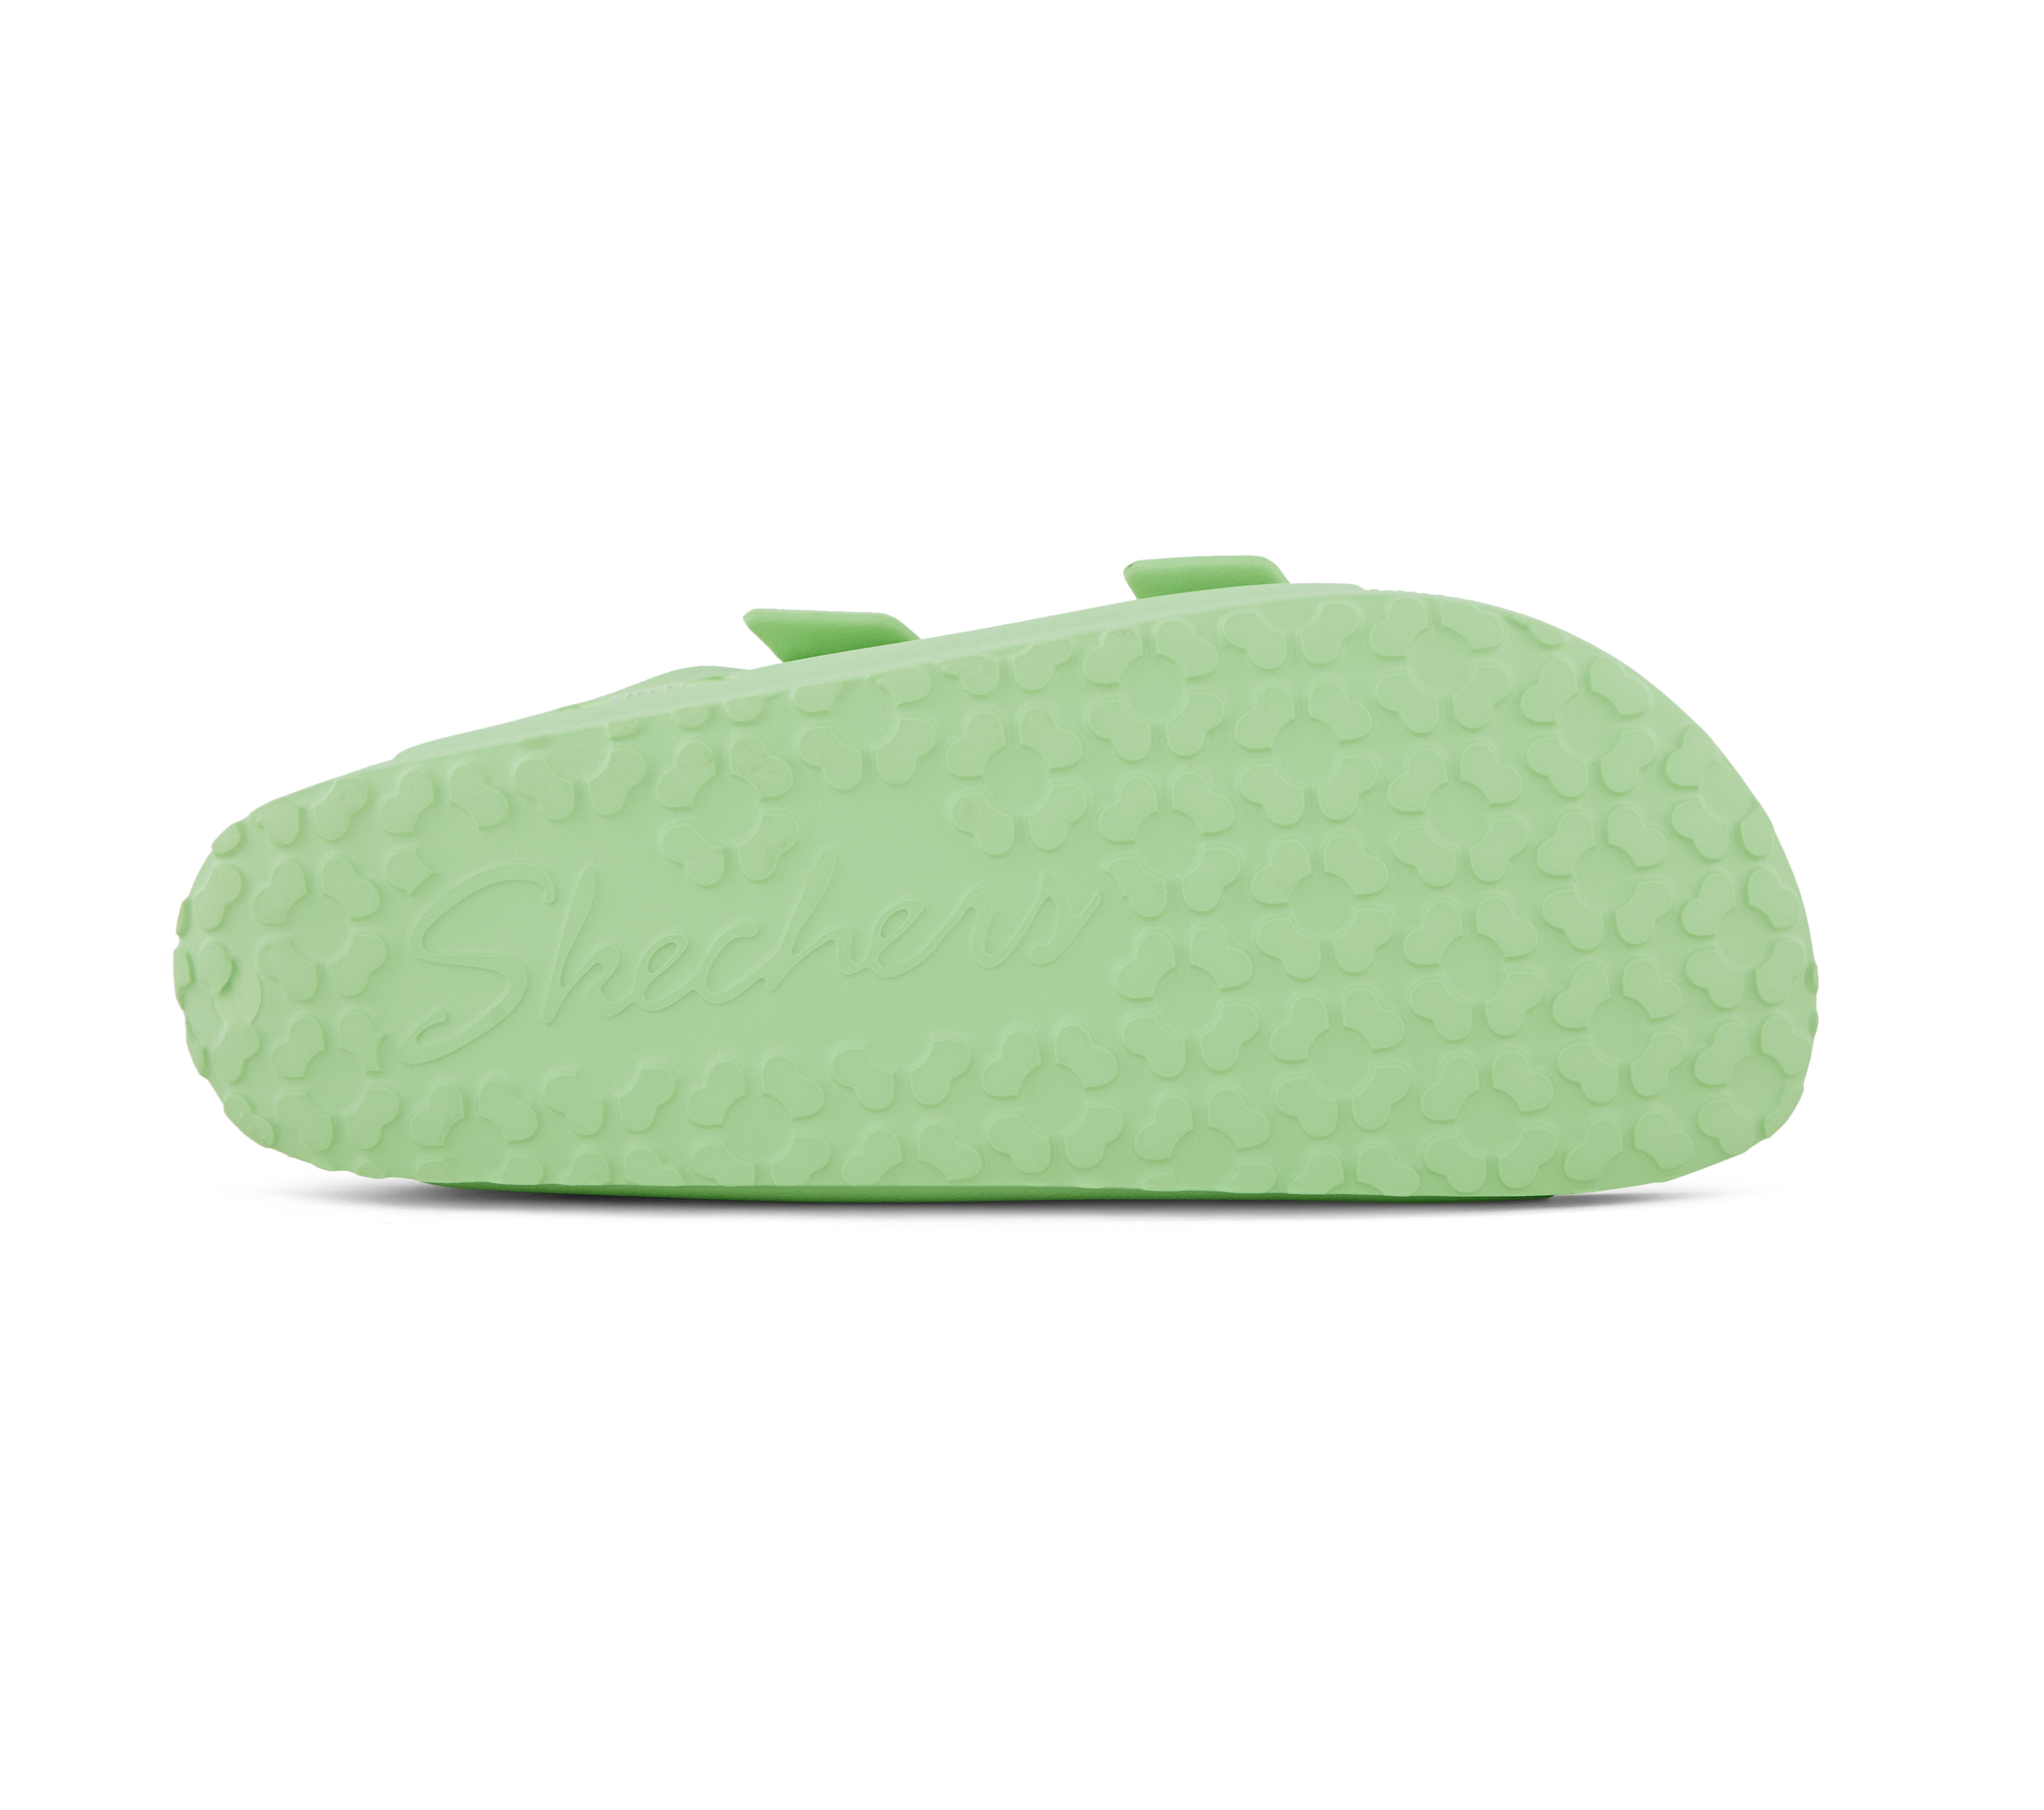 ARCH FIT CALI BREEZE 2, LIME Footwear Bottom View